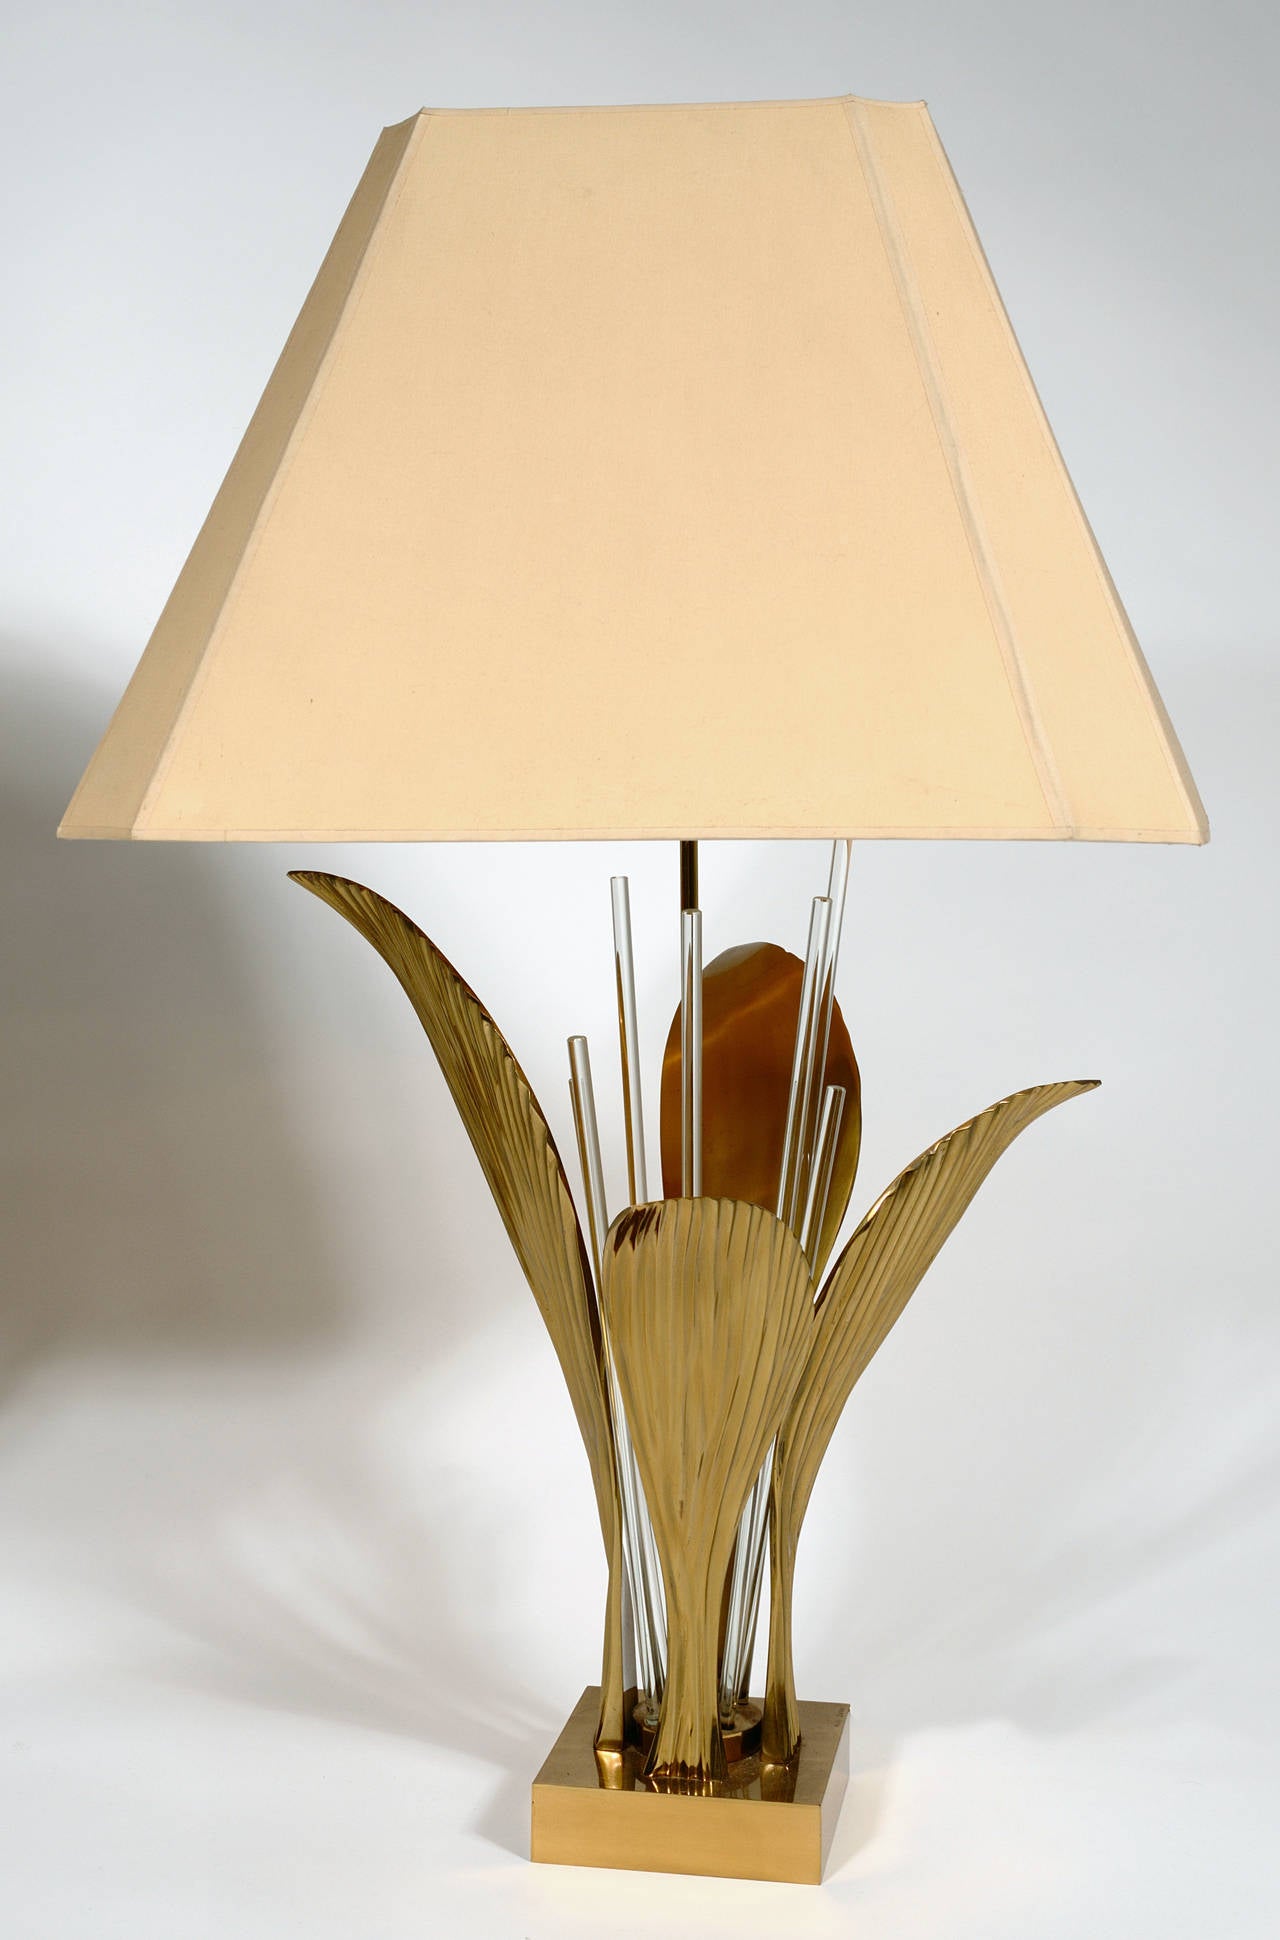 Pair of lamps by Willy Daro, leaf bronze and glass, original shade and conditions, signed by the artist.